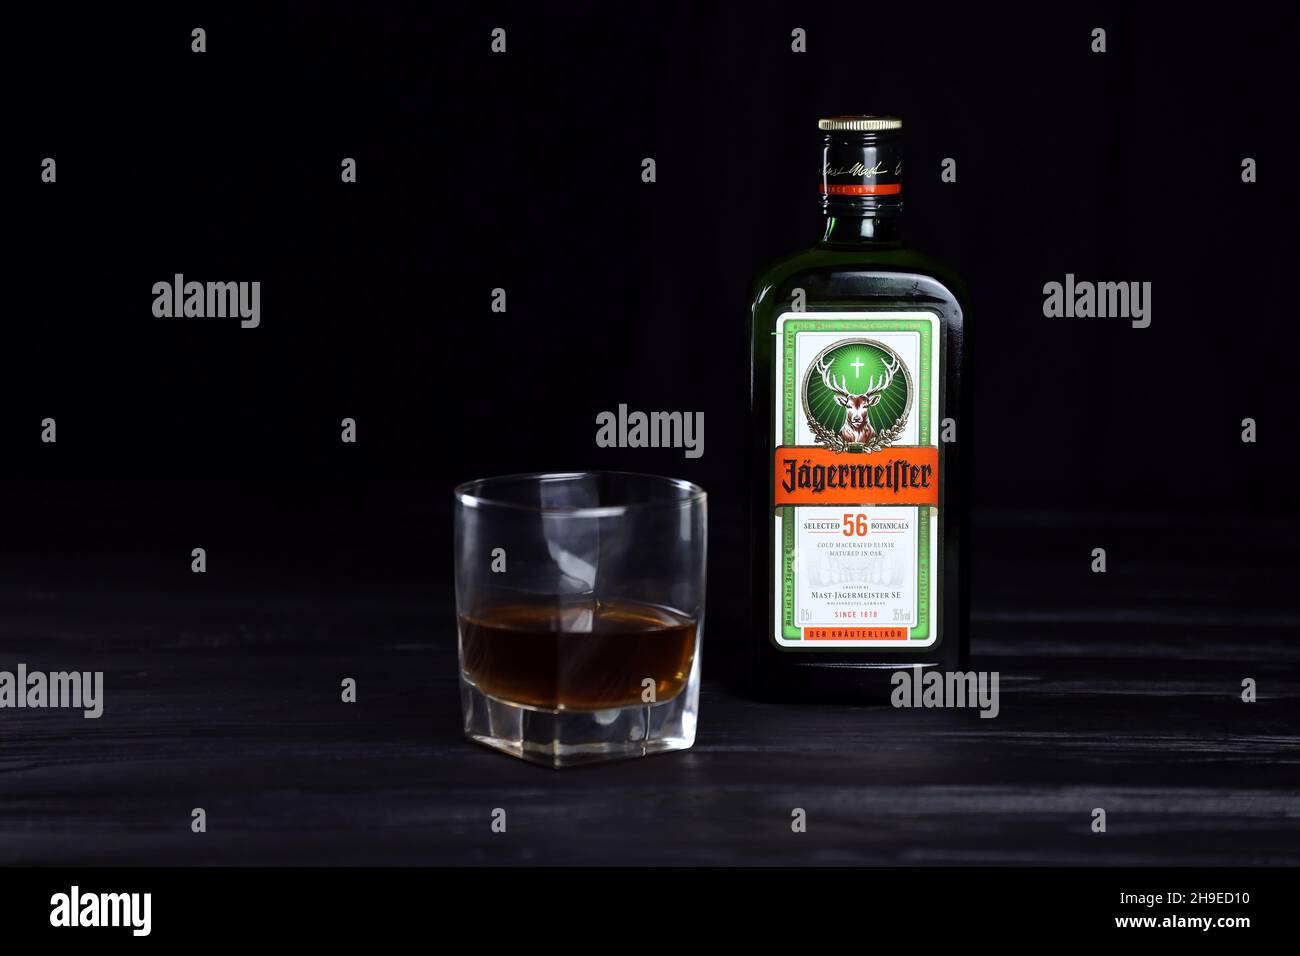 Page 3 - Jägermeister High Resolution Stock Photography and Images - Alamy